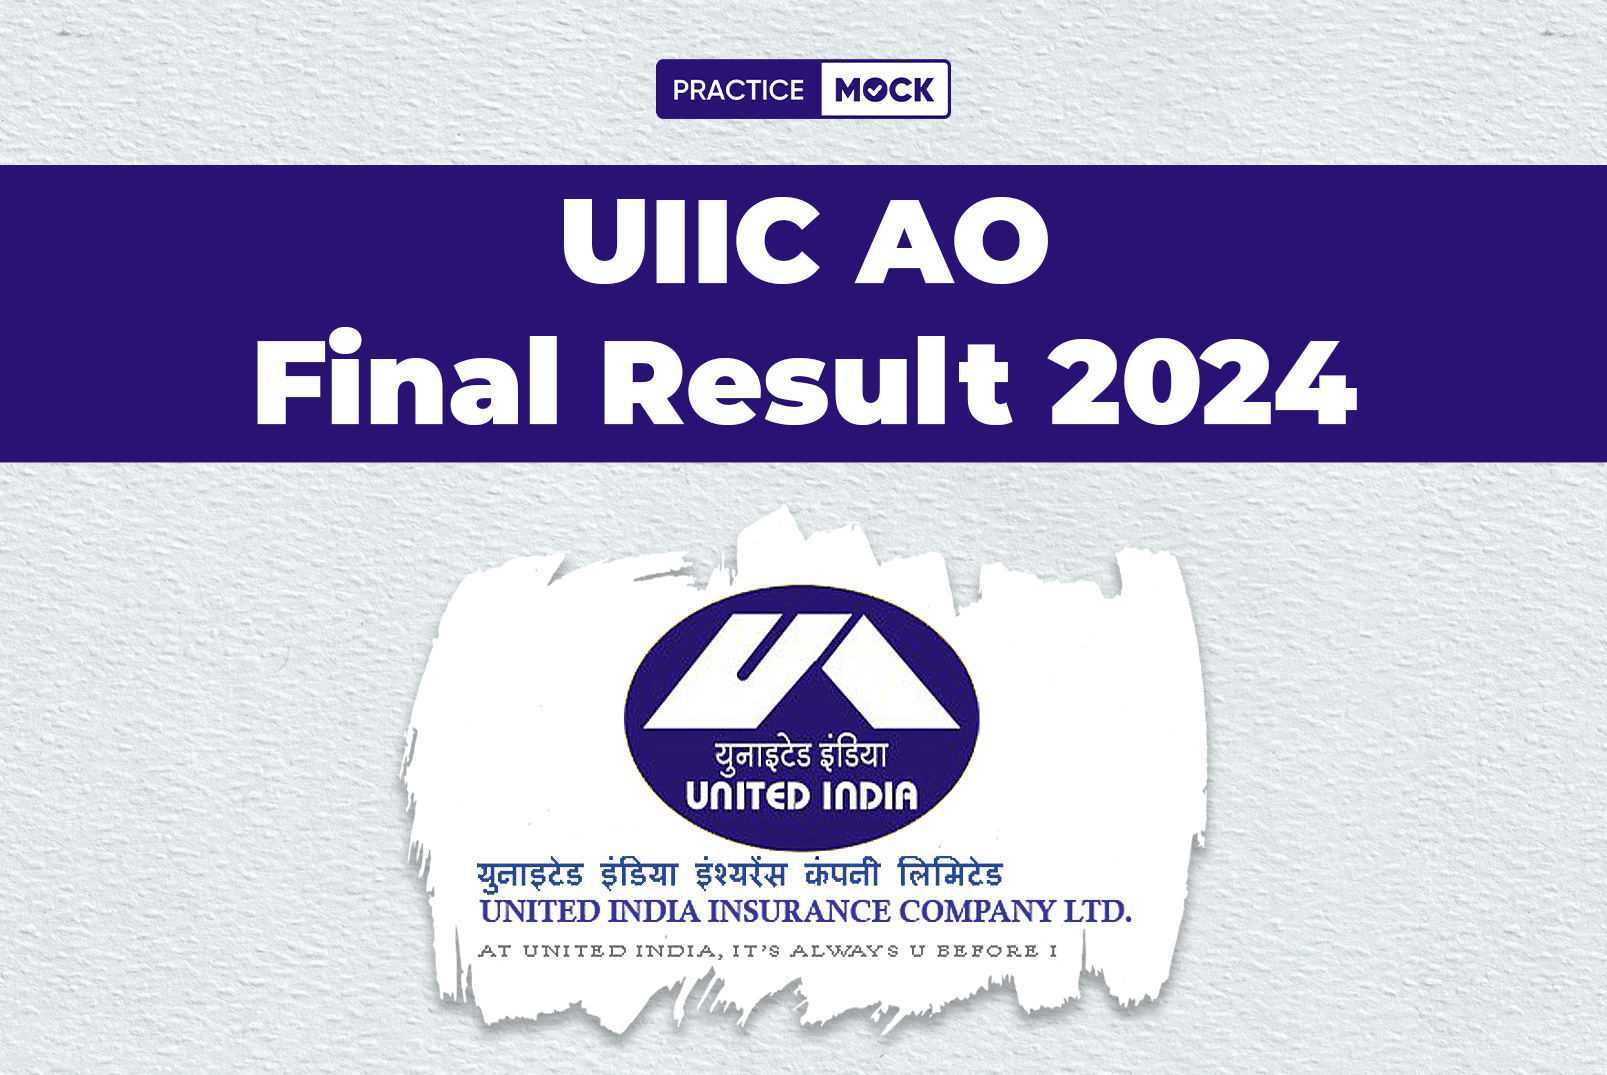 UIIC AO Final Result 2024